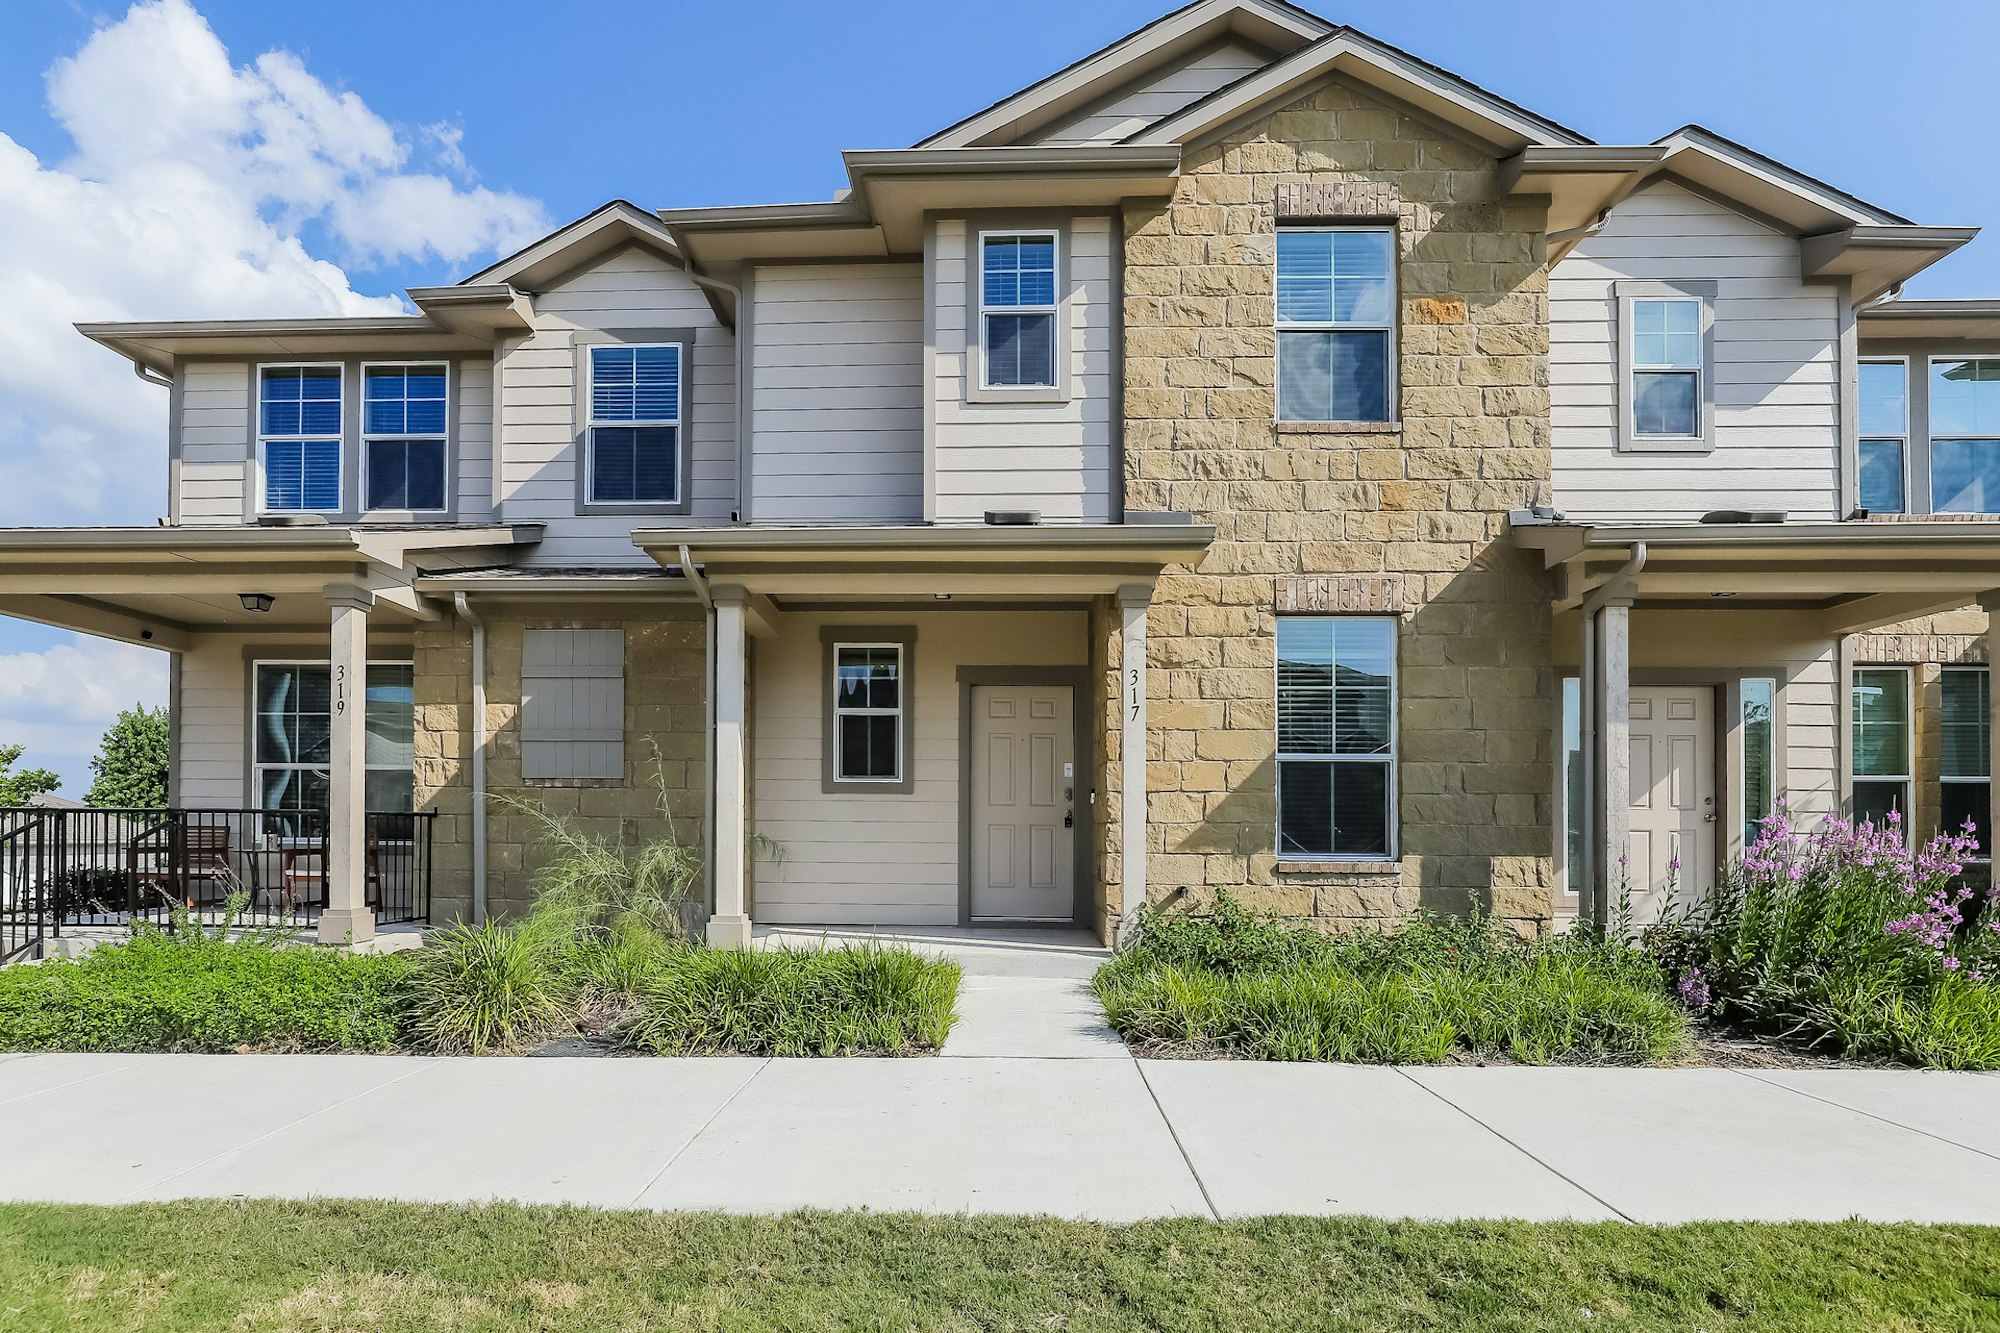 Photo 1 of 25 - 317 Crater Lake Dr, Pflugerville, TX 78660